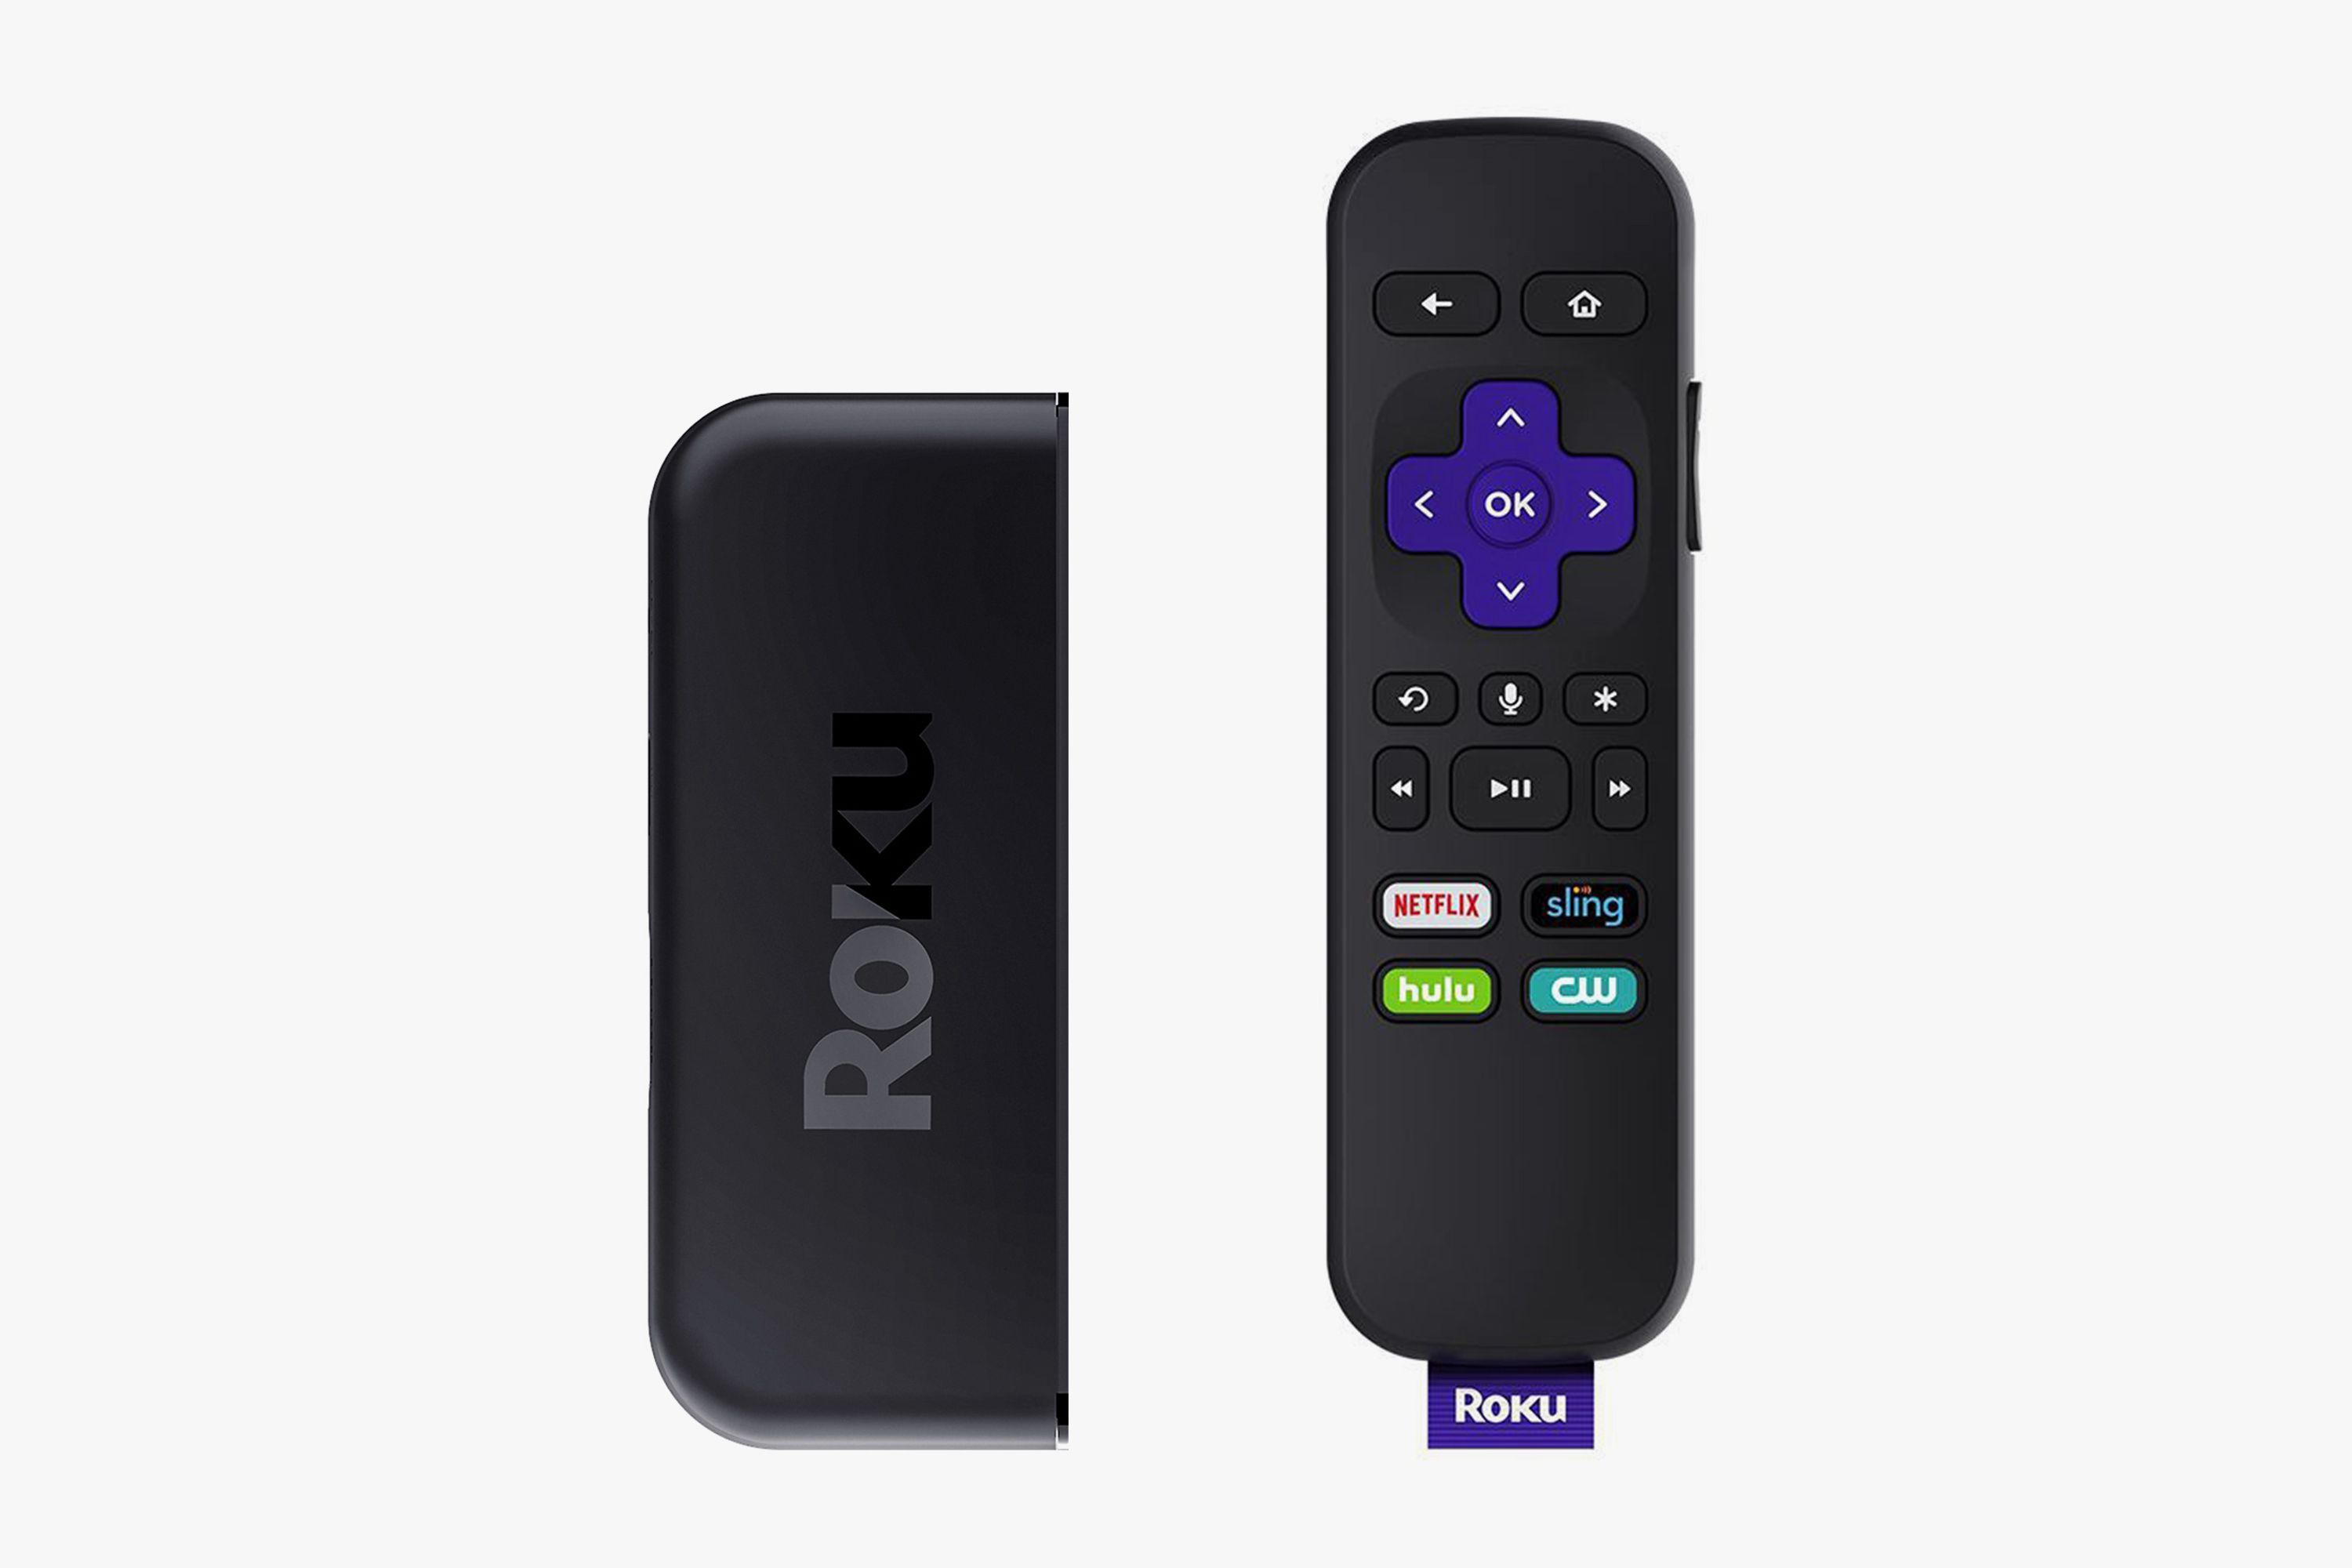 is there a directv app for roku